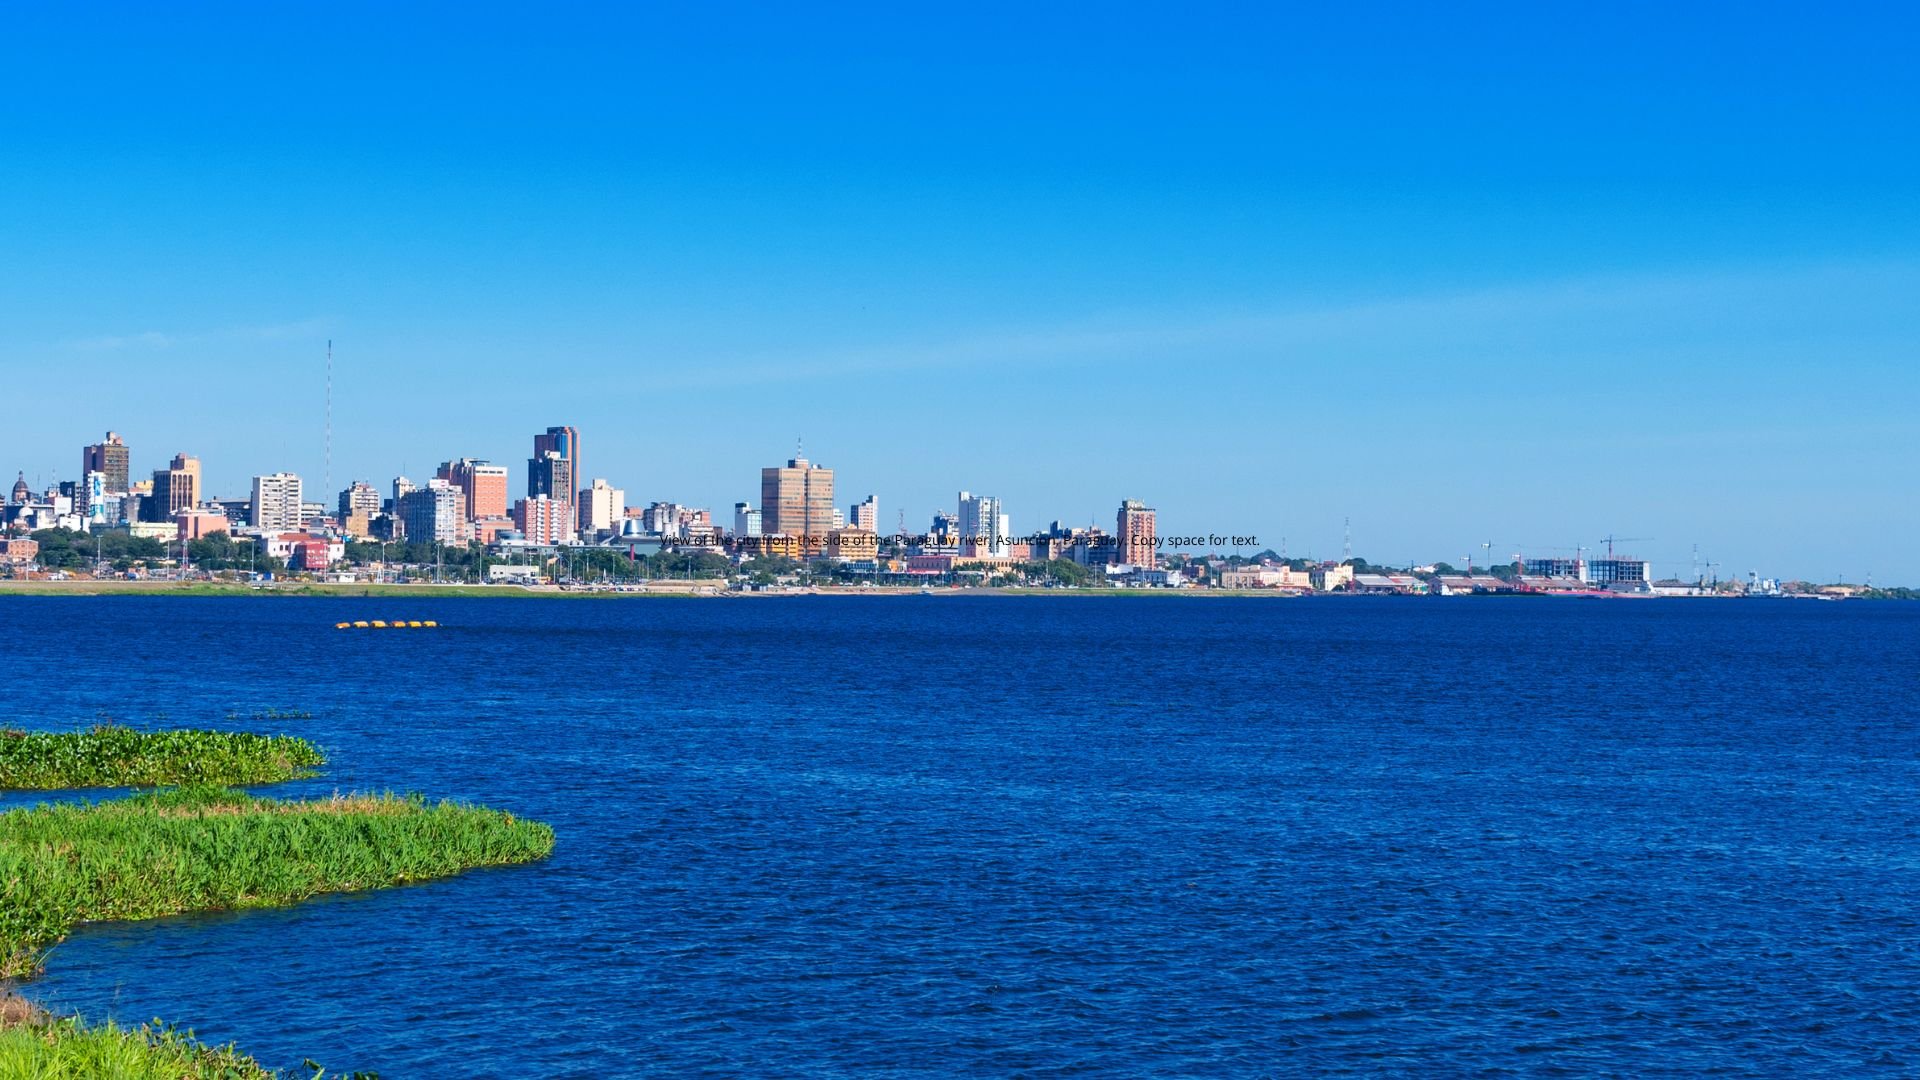 View of the city from the side of the Paraguay river, Asuncion, Paraguay.